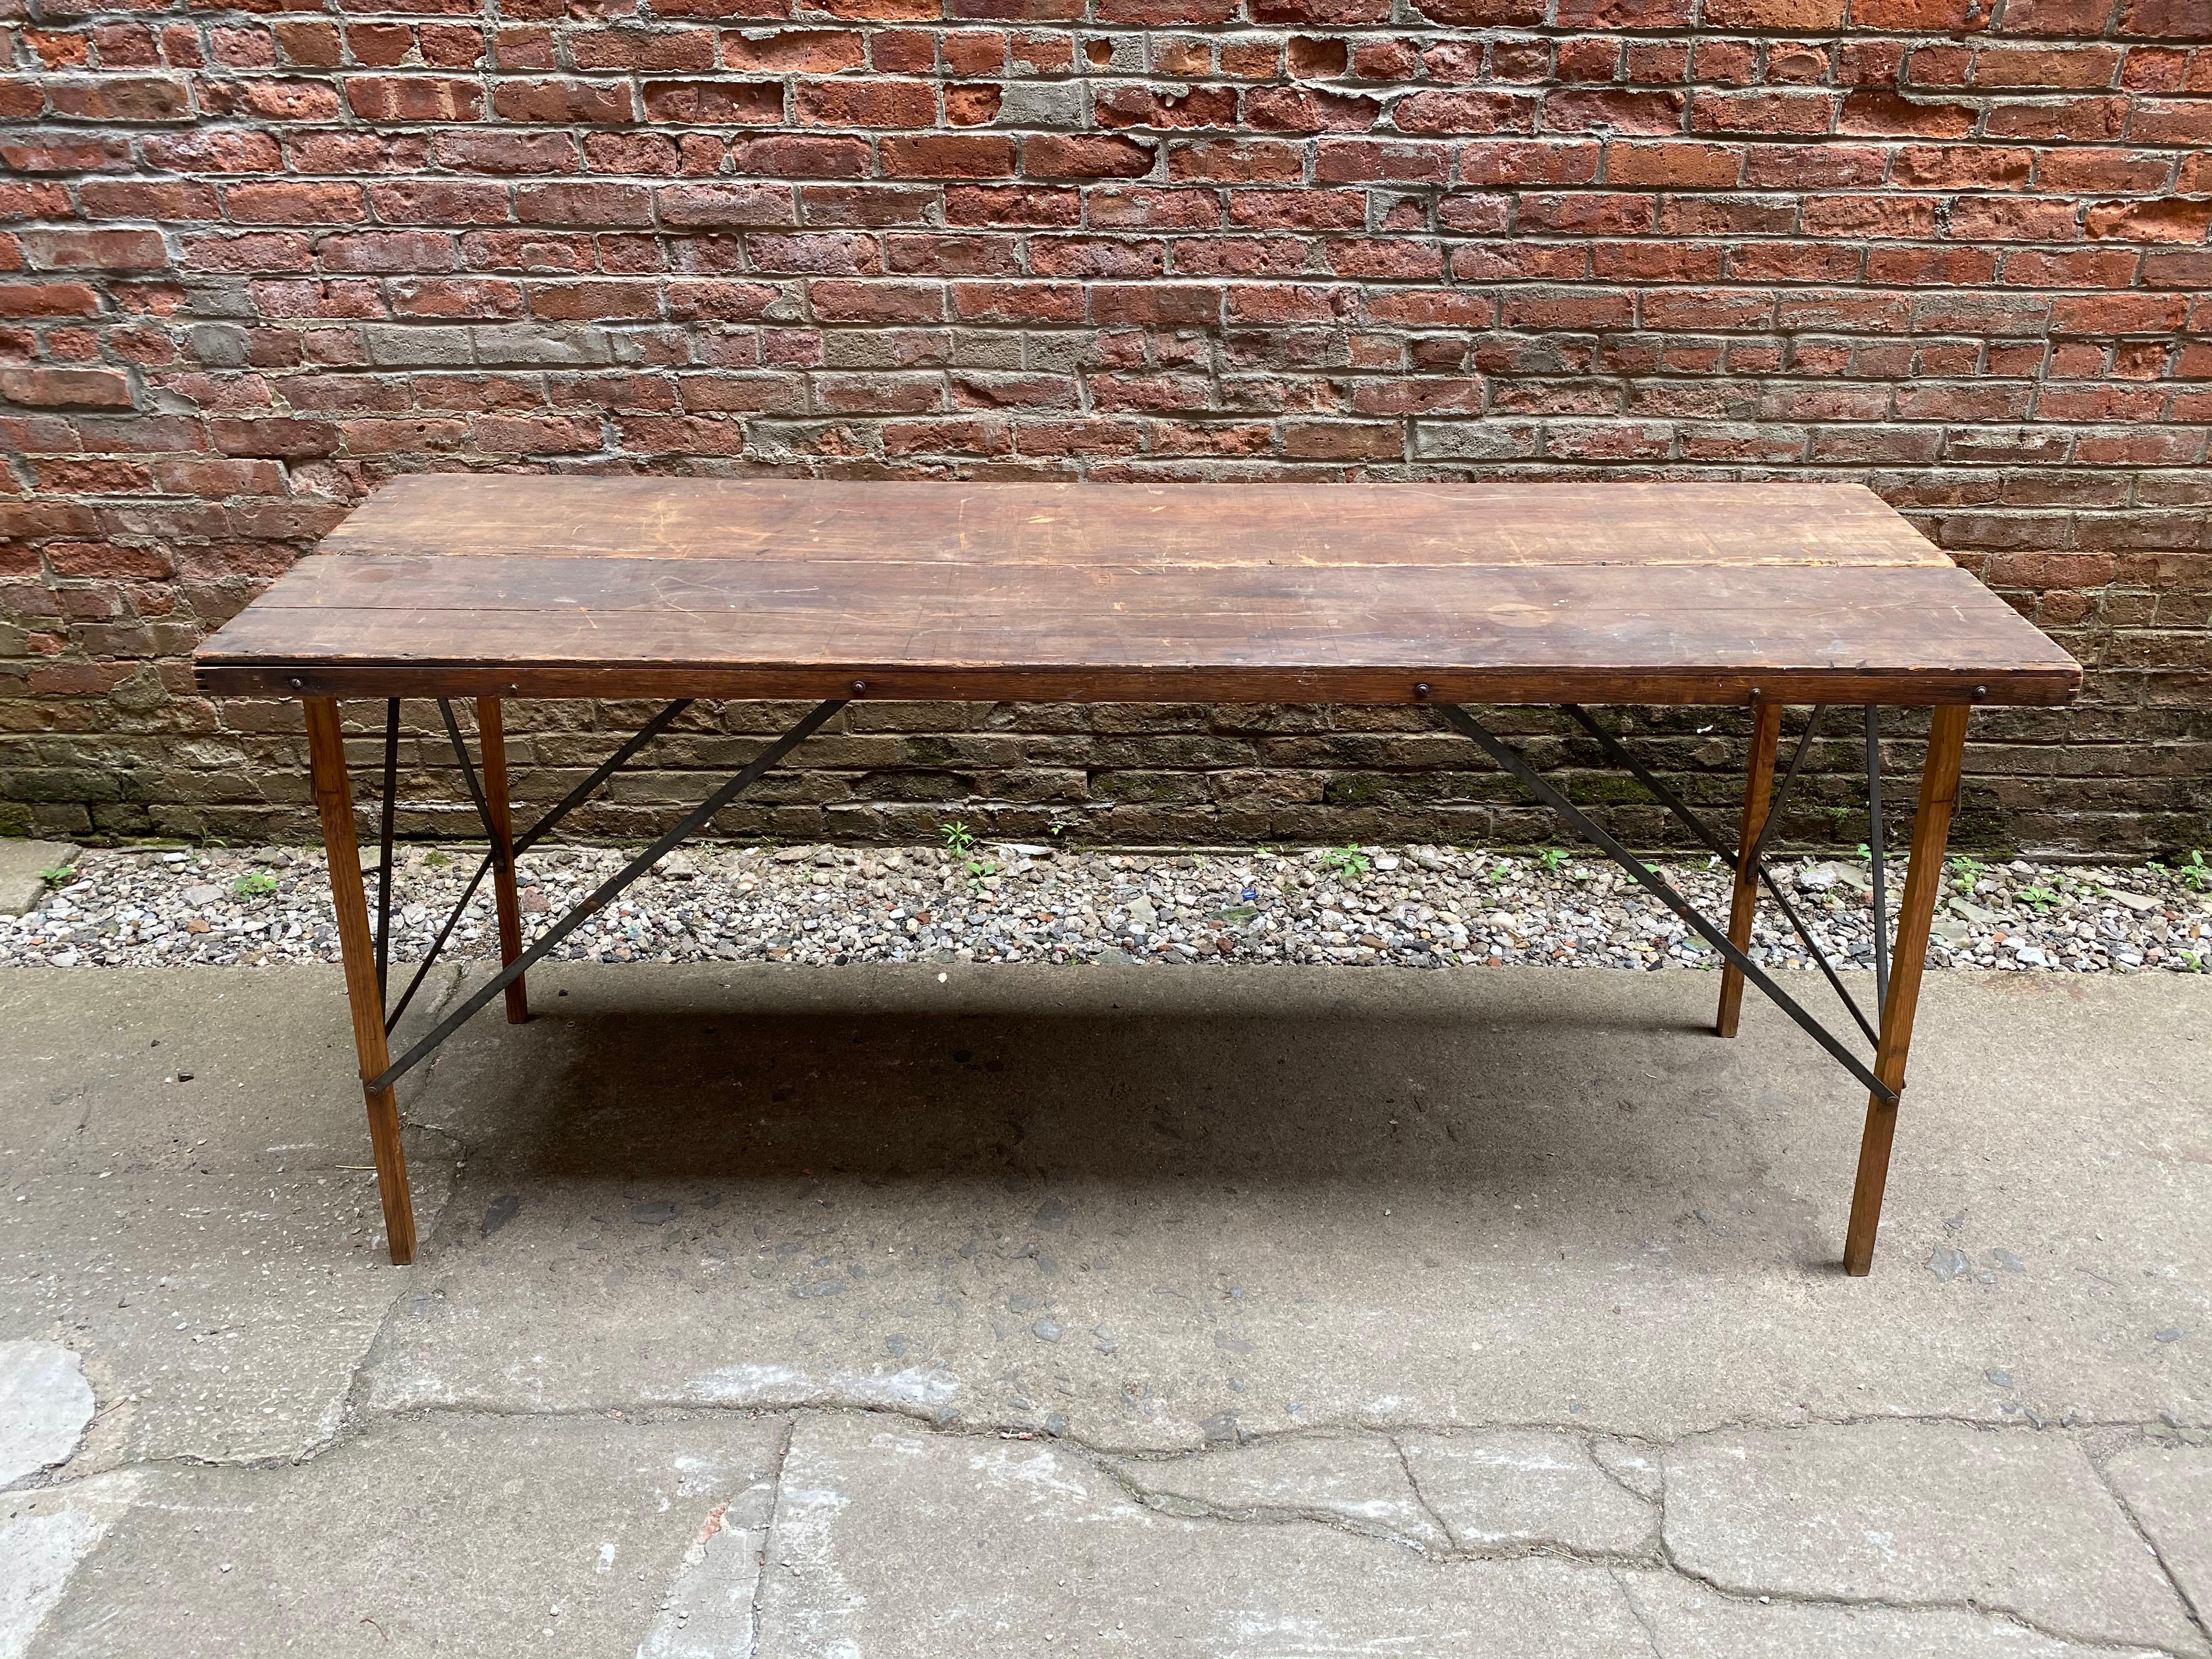 Compact and lightweight vintage wallpaper hanger's table. The legs extend and the top flips open for ultimate flat work space. Great as a console or display. All wood construction, circa 1920-1930. Wear commensurate with age and use. There is a